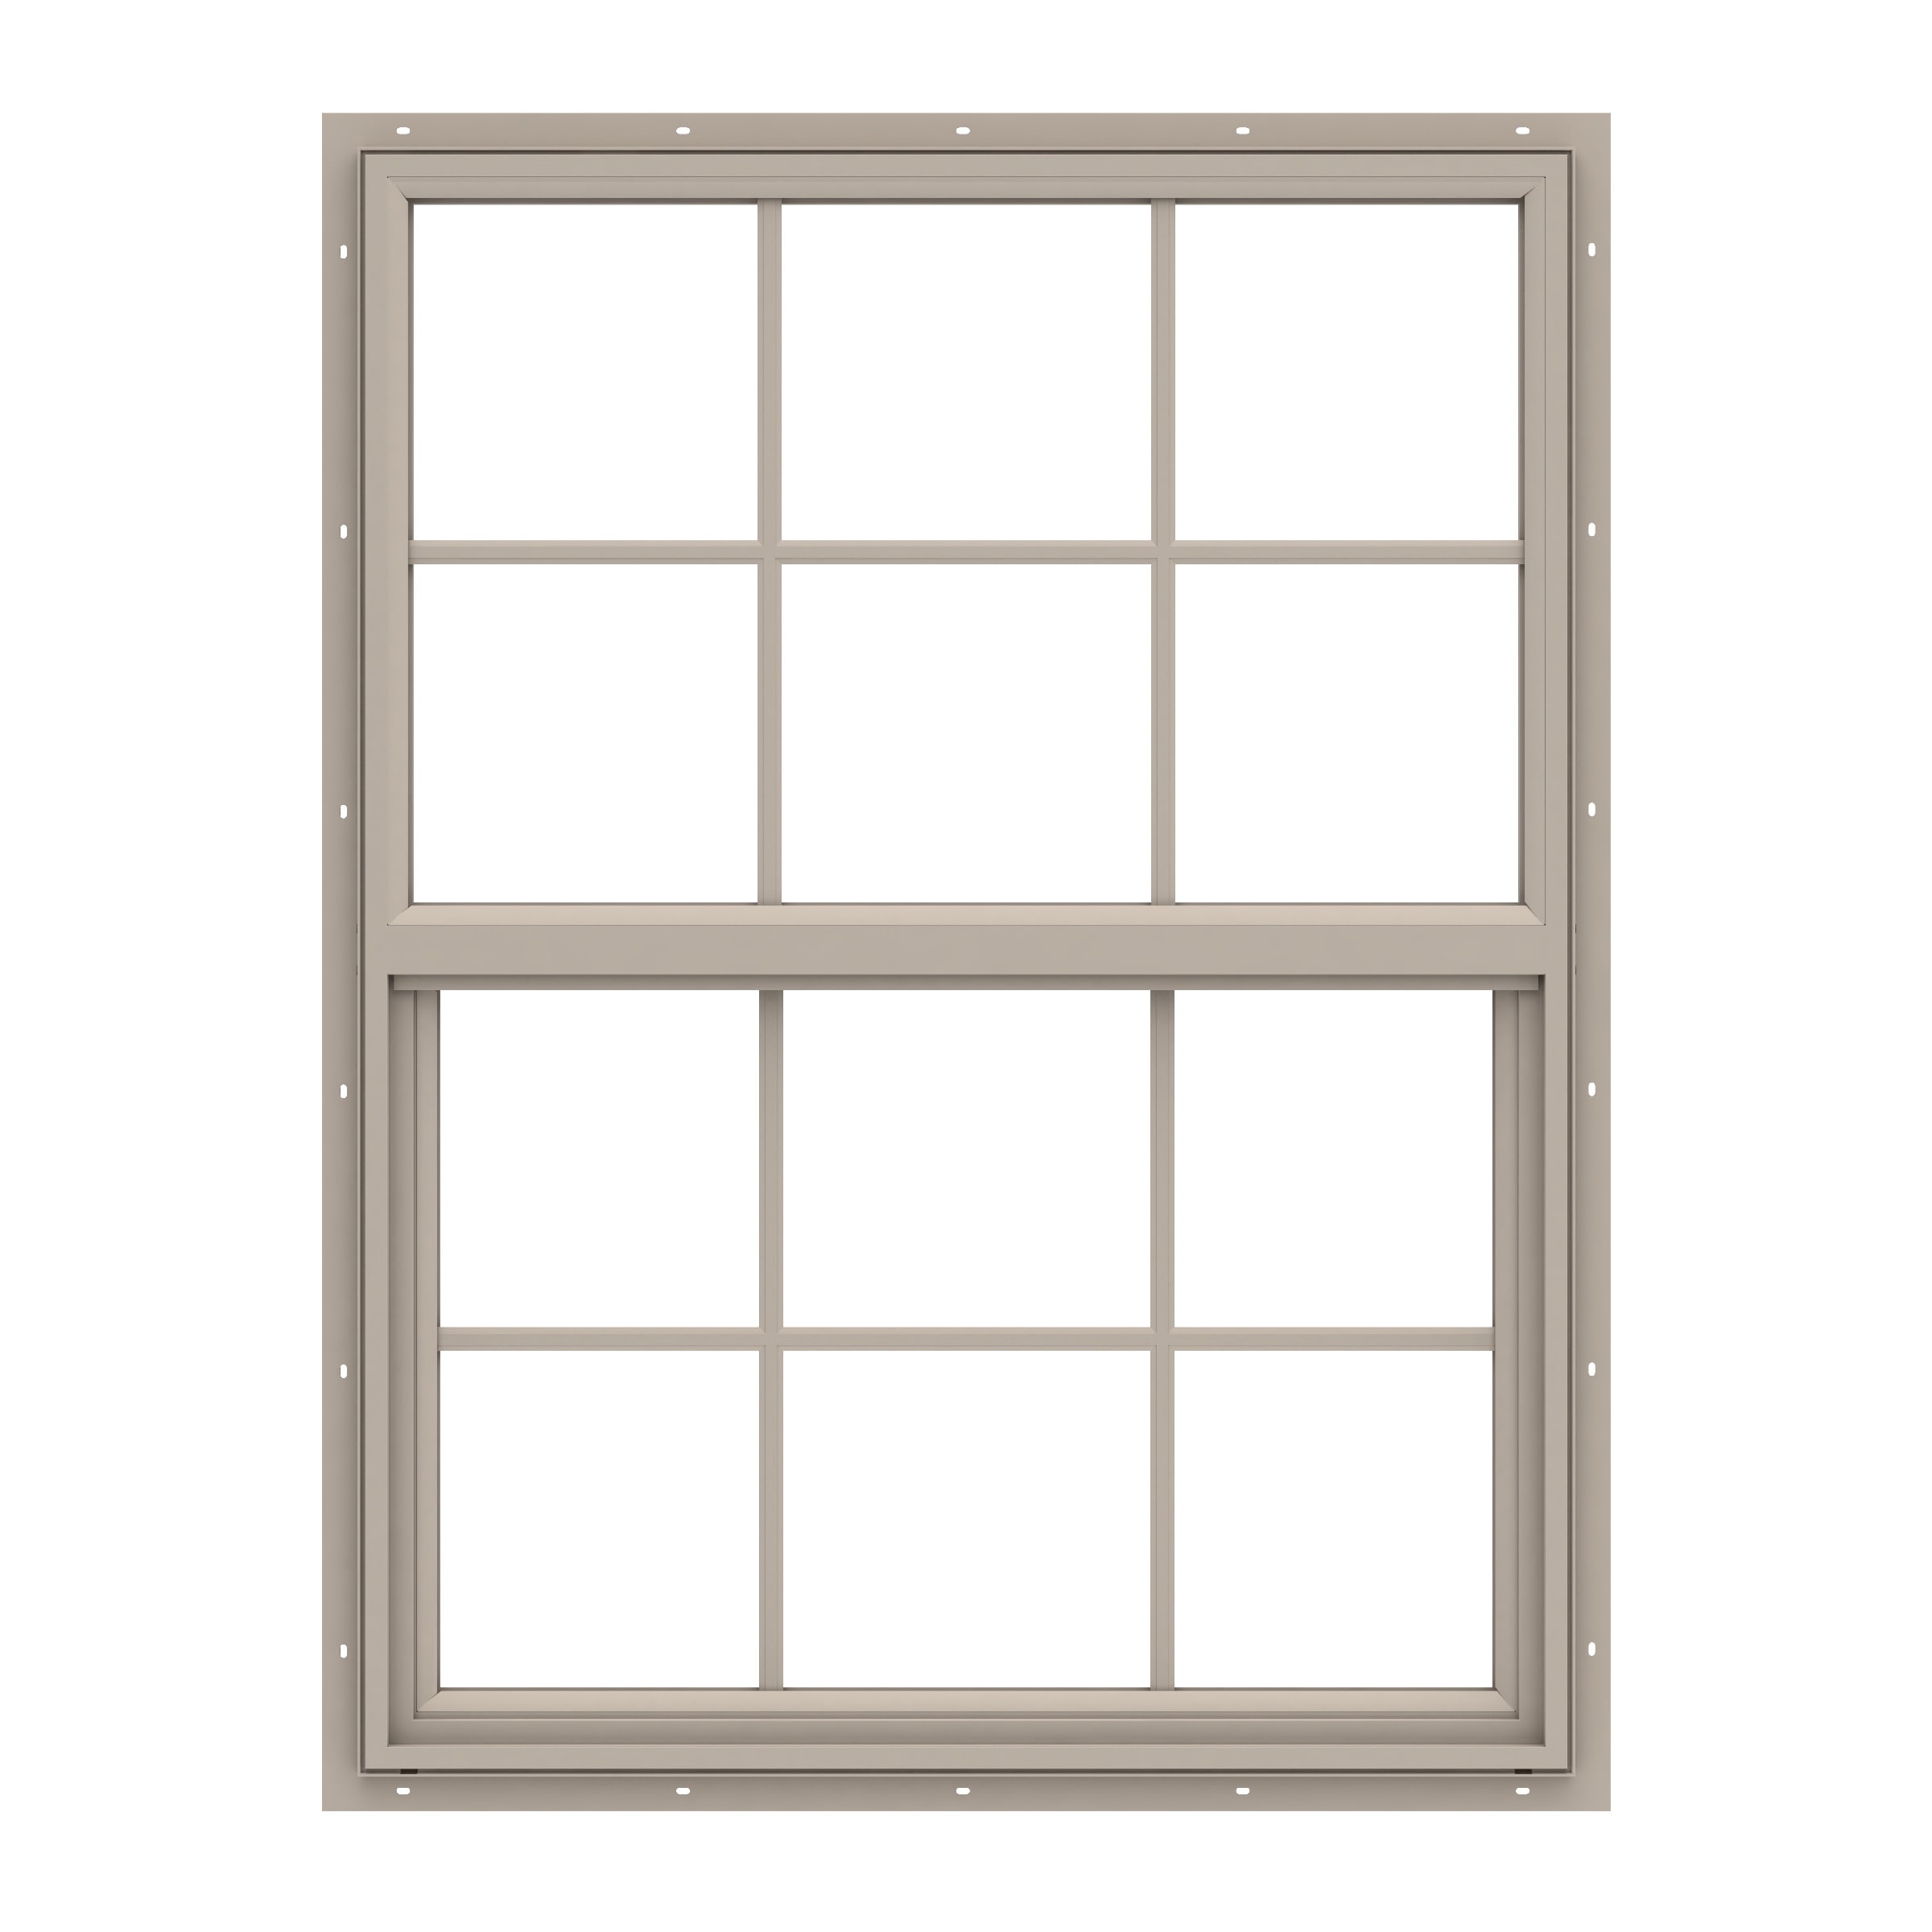 Pella 150 Series New Construction 23.5-in x 35.5-in x 2.6875-in Jamb Fossil Vinyl Low-e Argon Single Hung Window with Grids Half Screen Included -  1000011097